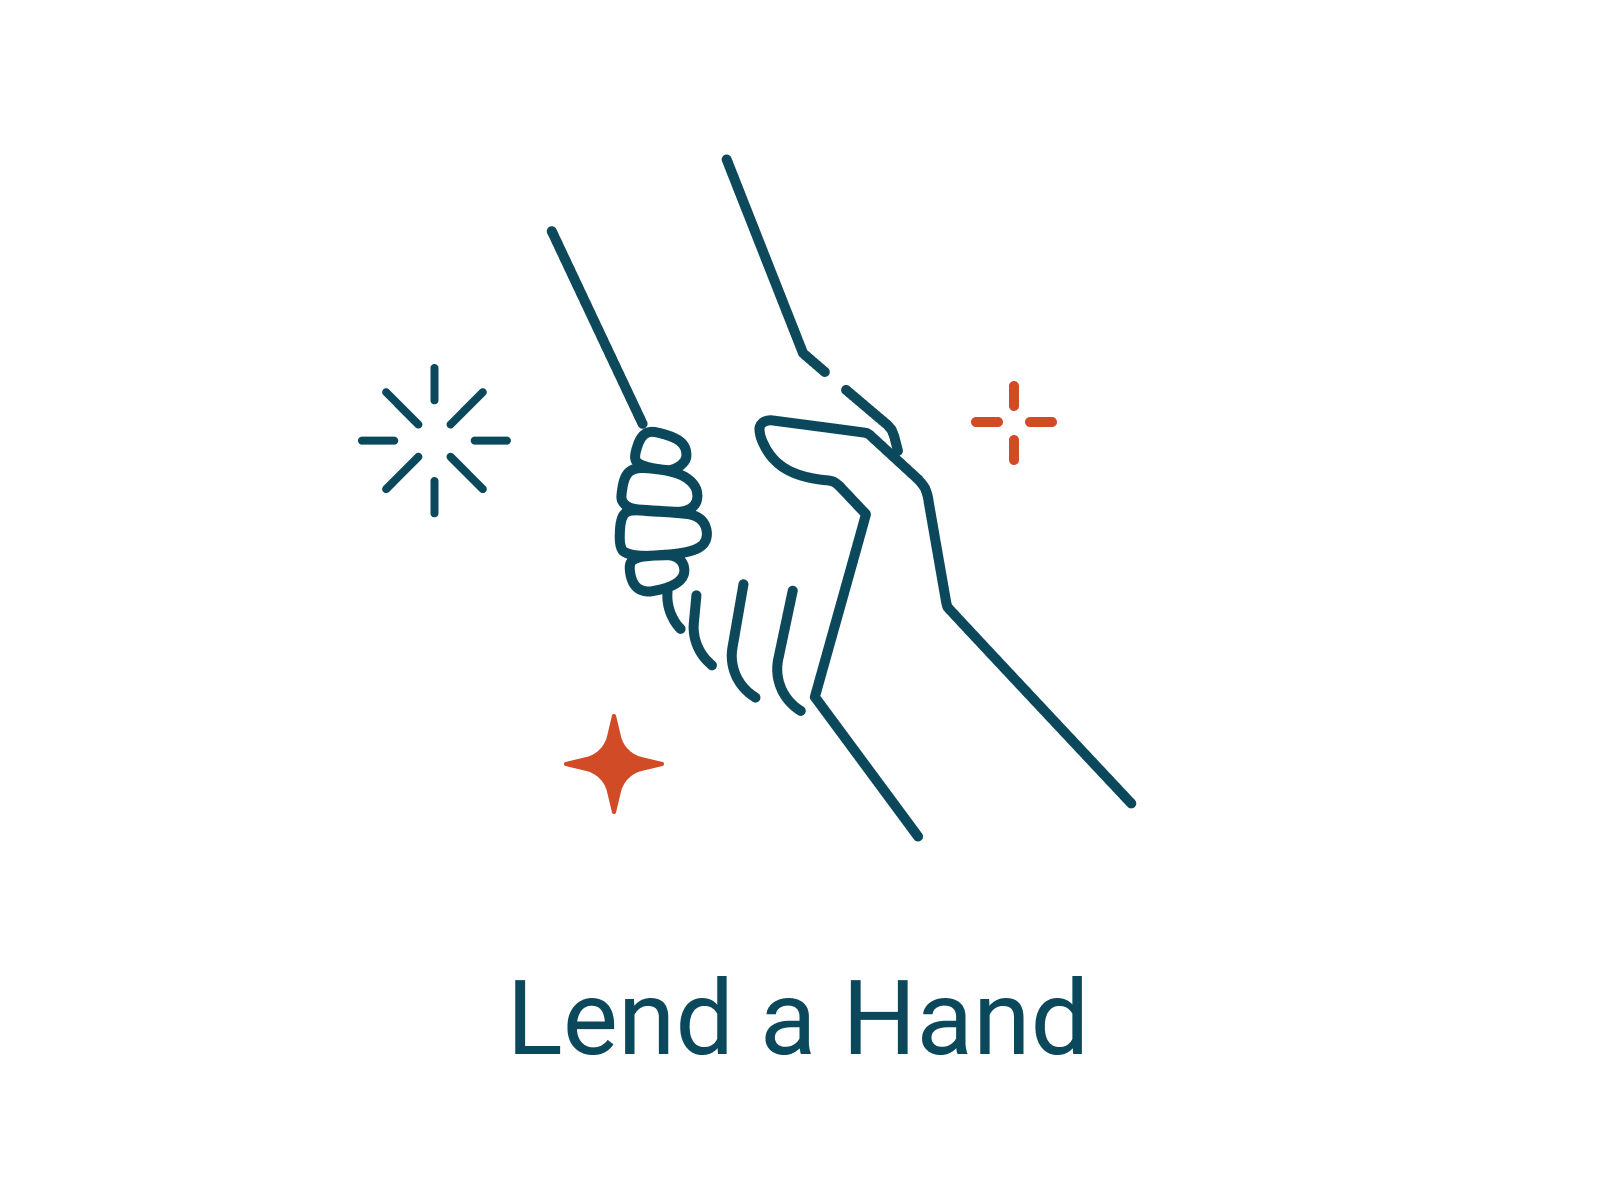 Illustration of a hand from the upper left grasping a hand from the lower right with the words "Lend a Hand" underneath.